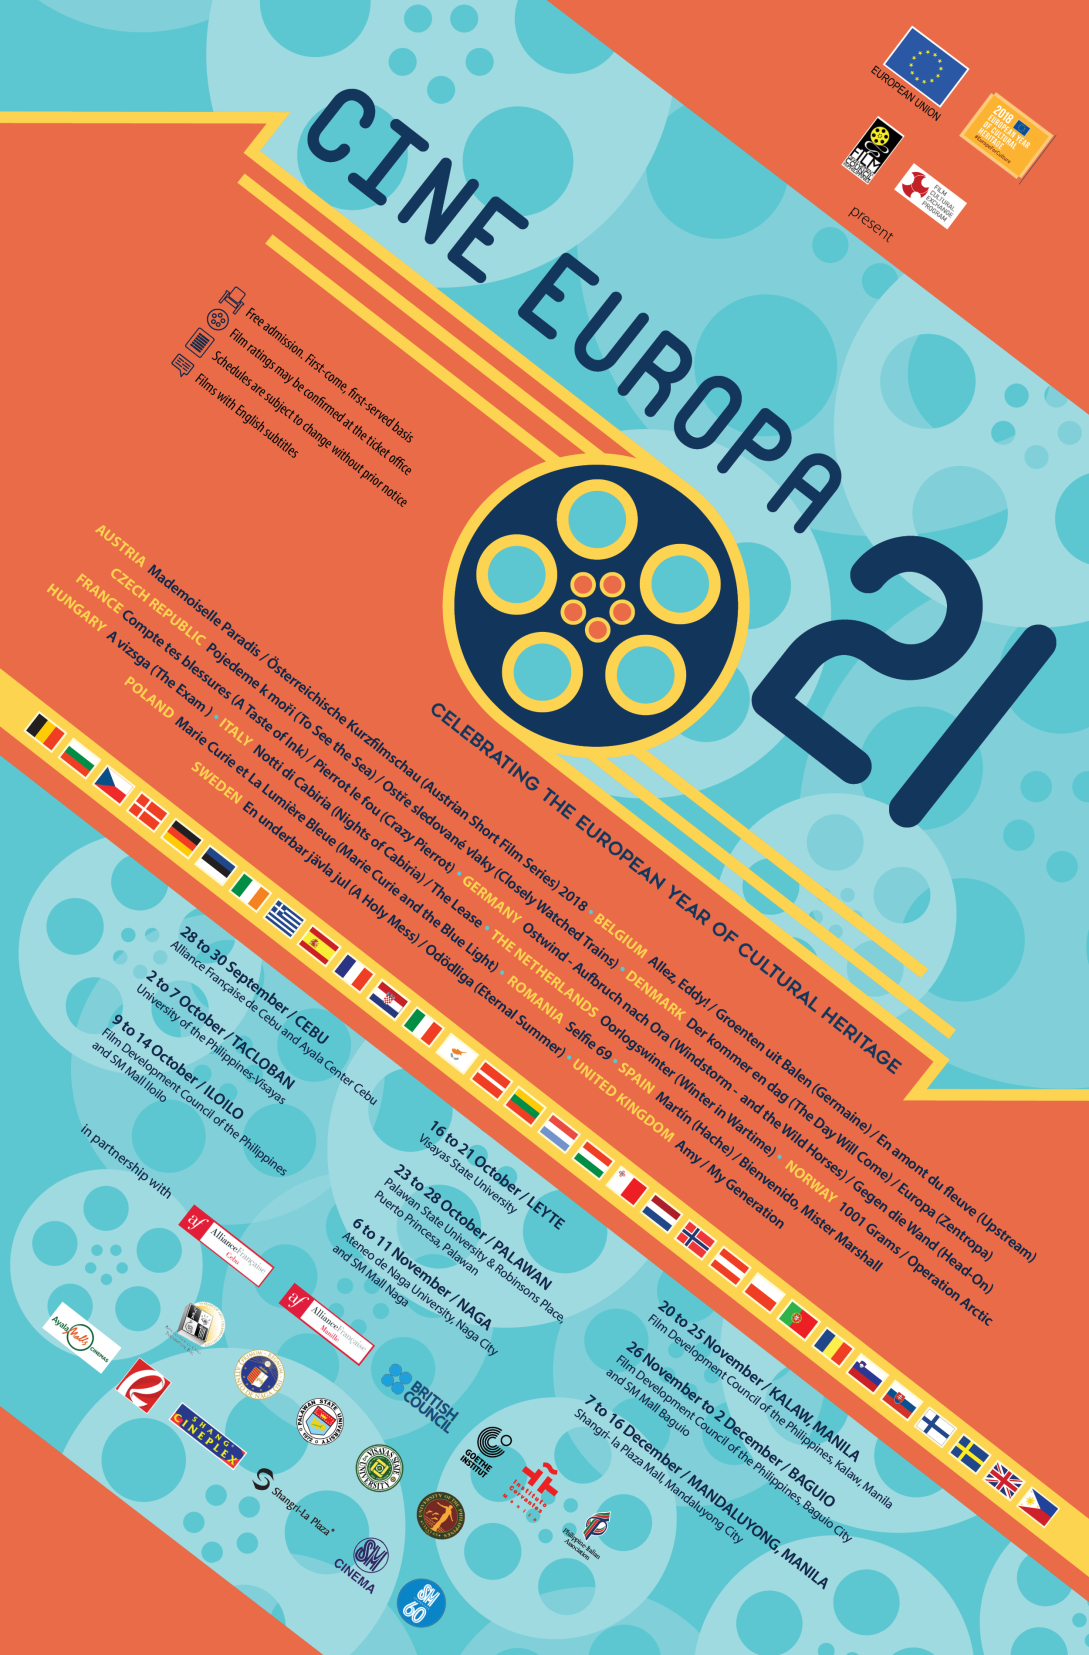 Cine Europa enters its 21st year, starts screenings in Cebu City for the  first time | EEAS Website